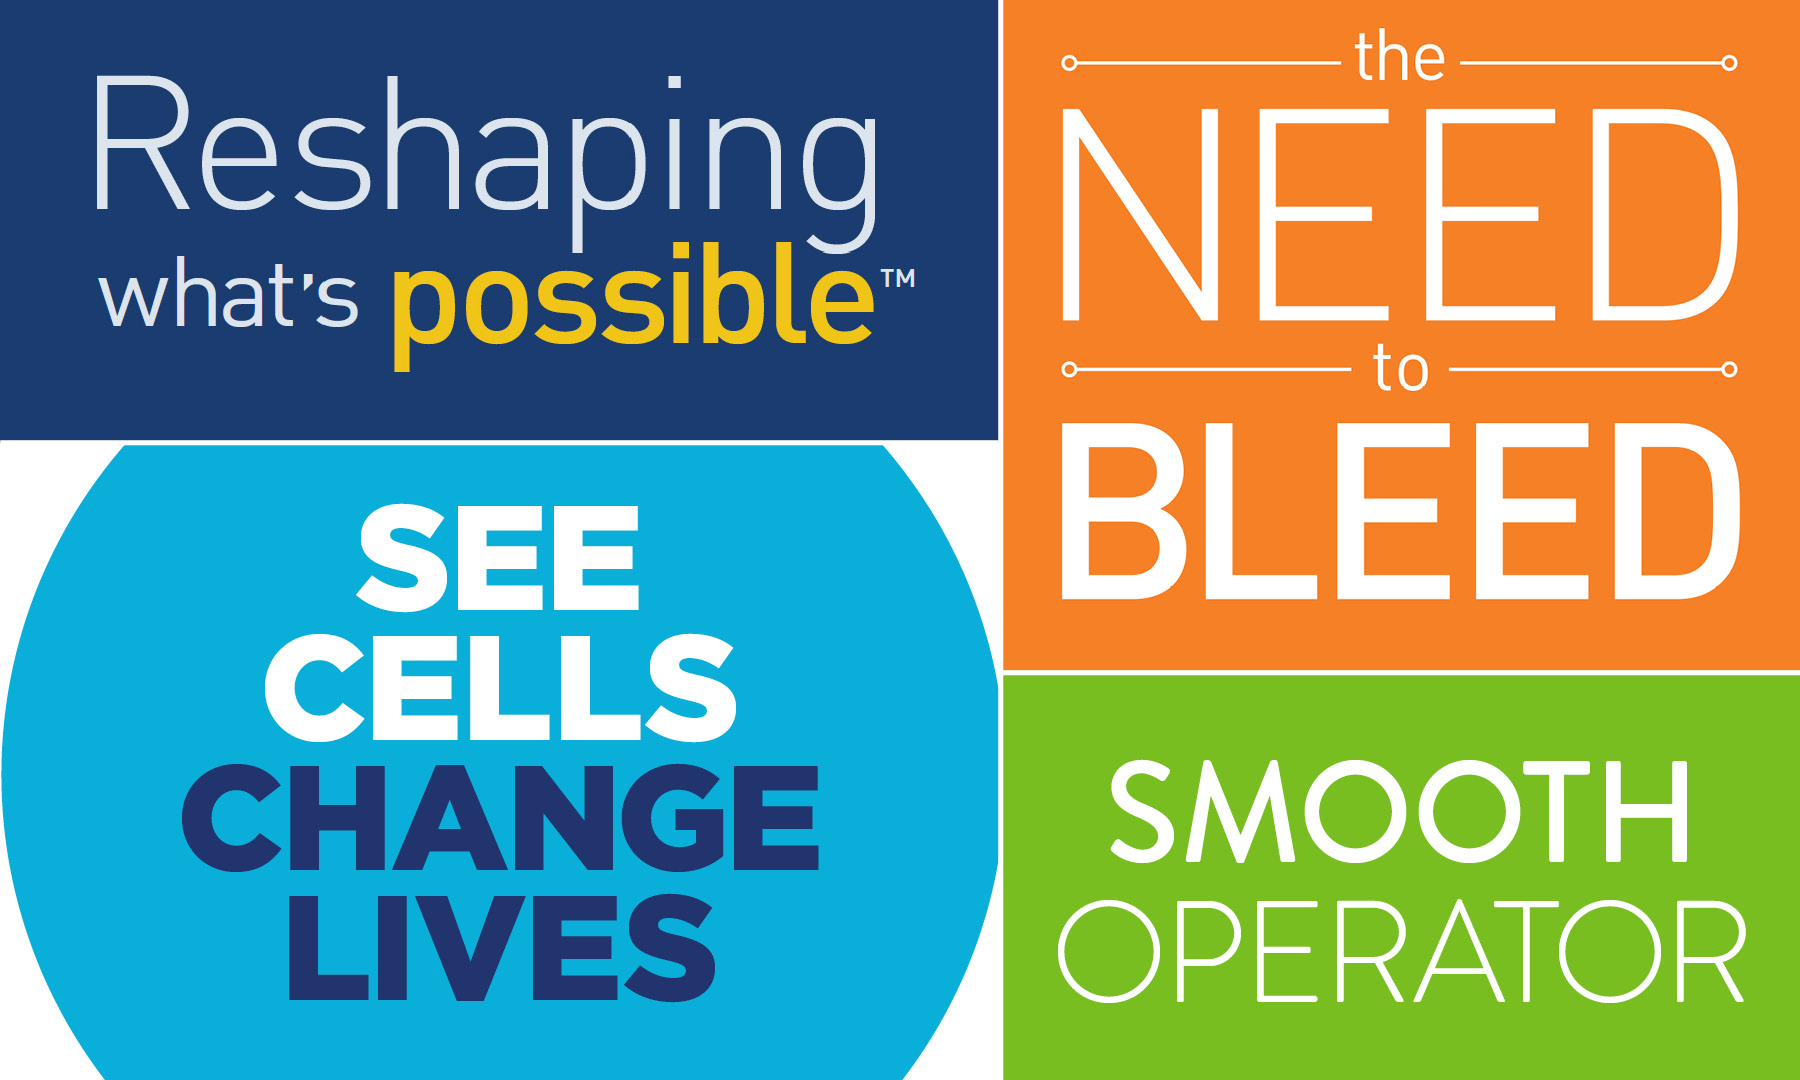 Reshaping what's possible. The need to bleed. See Cells, Change Lives. Smooth Operator. Graphic: each phrase is in its own colorful section.